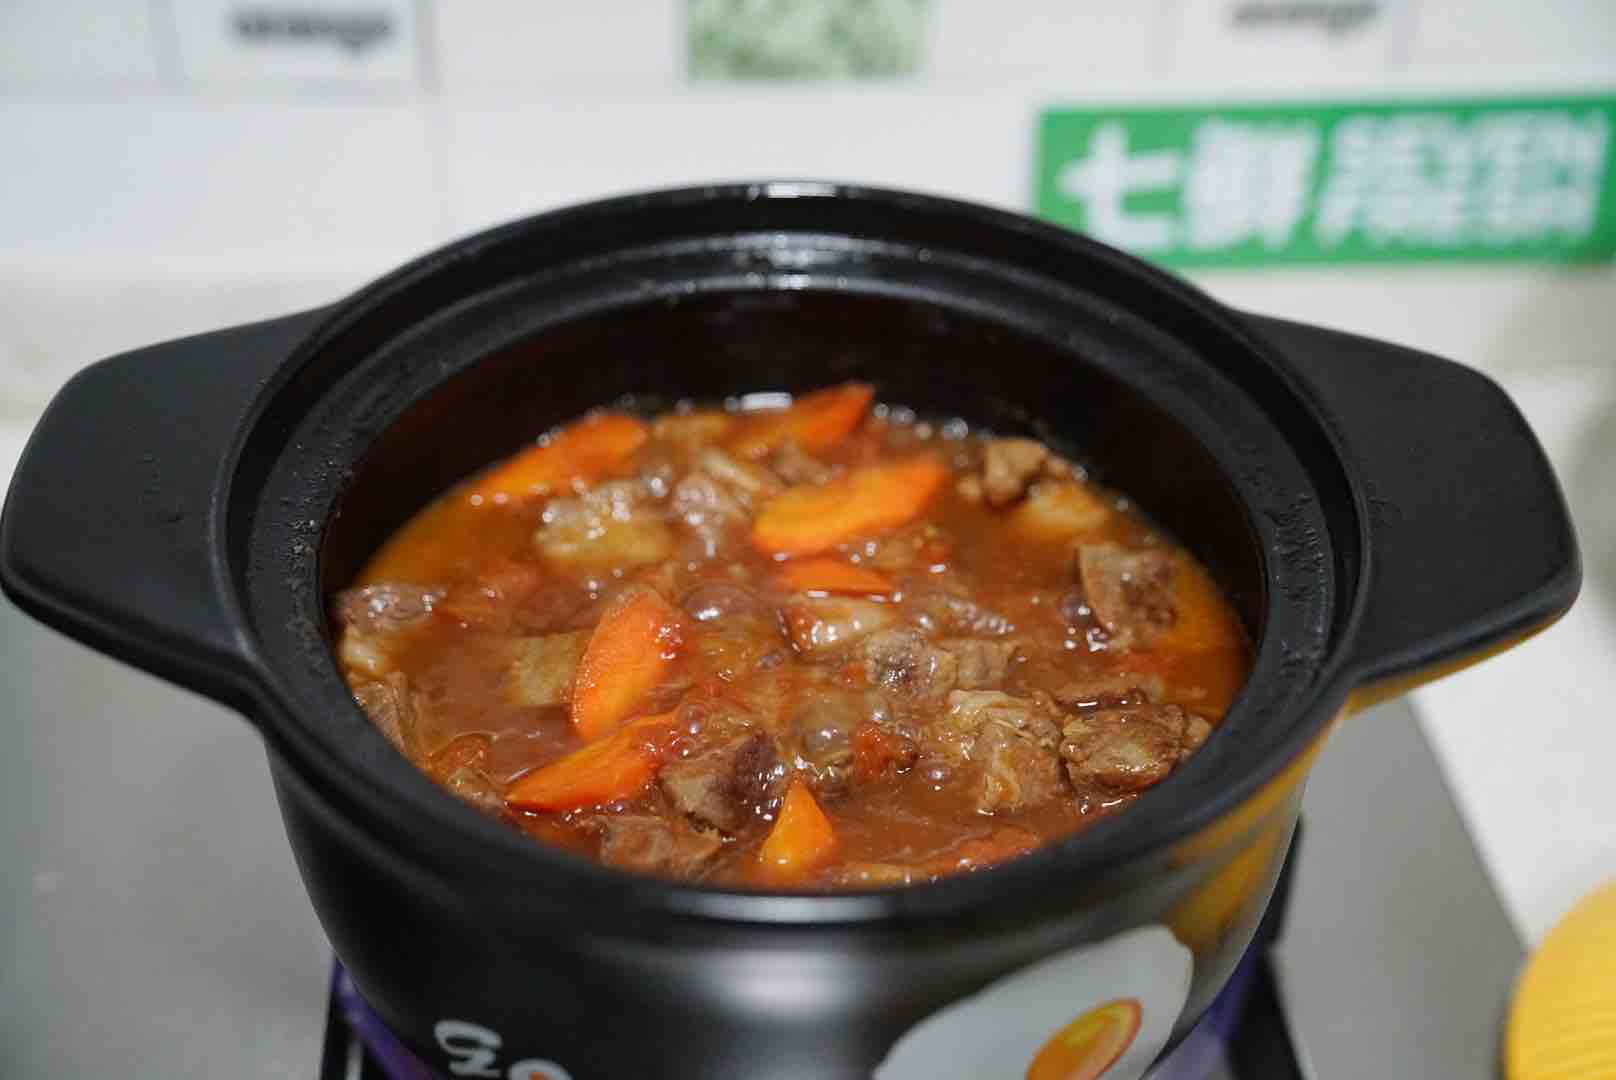 Chinese New Year Family Banquet in A Nutritious Pot, Sometimes with Beef Brisket and Meat and Vegetables recipe